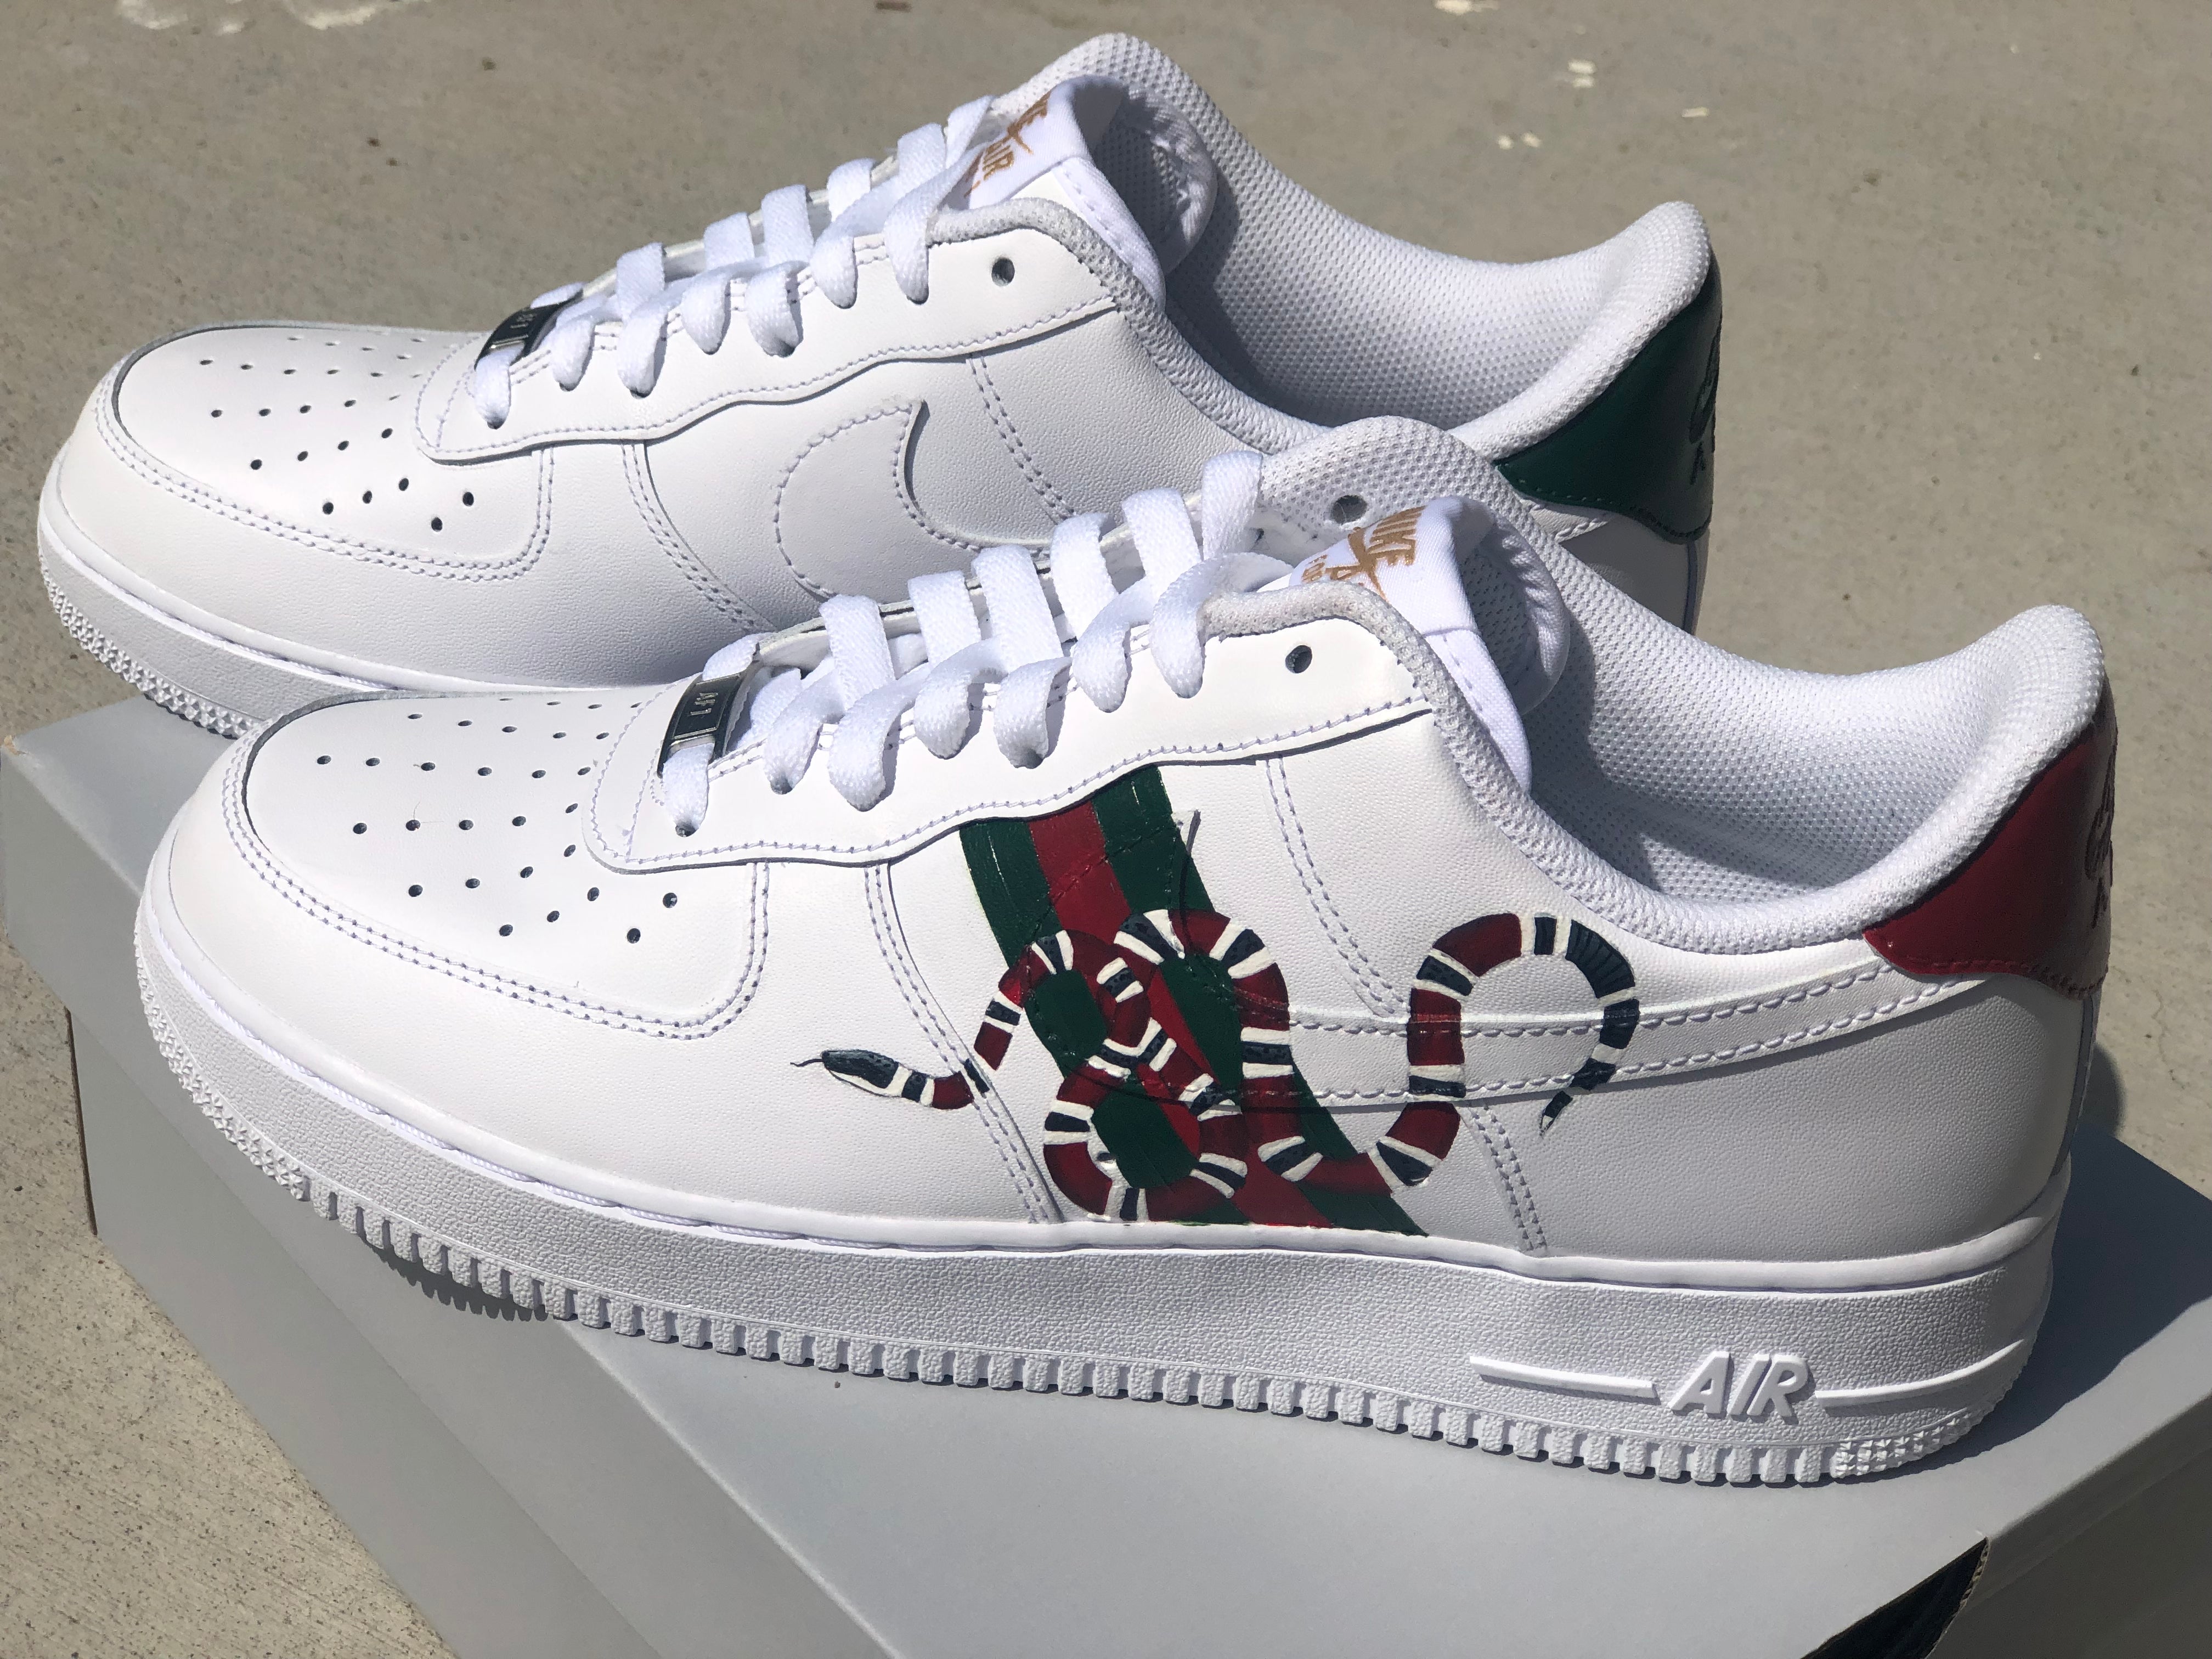 Camo Red and Black Drip Custom Air Force 1 - Hand Painted AF1